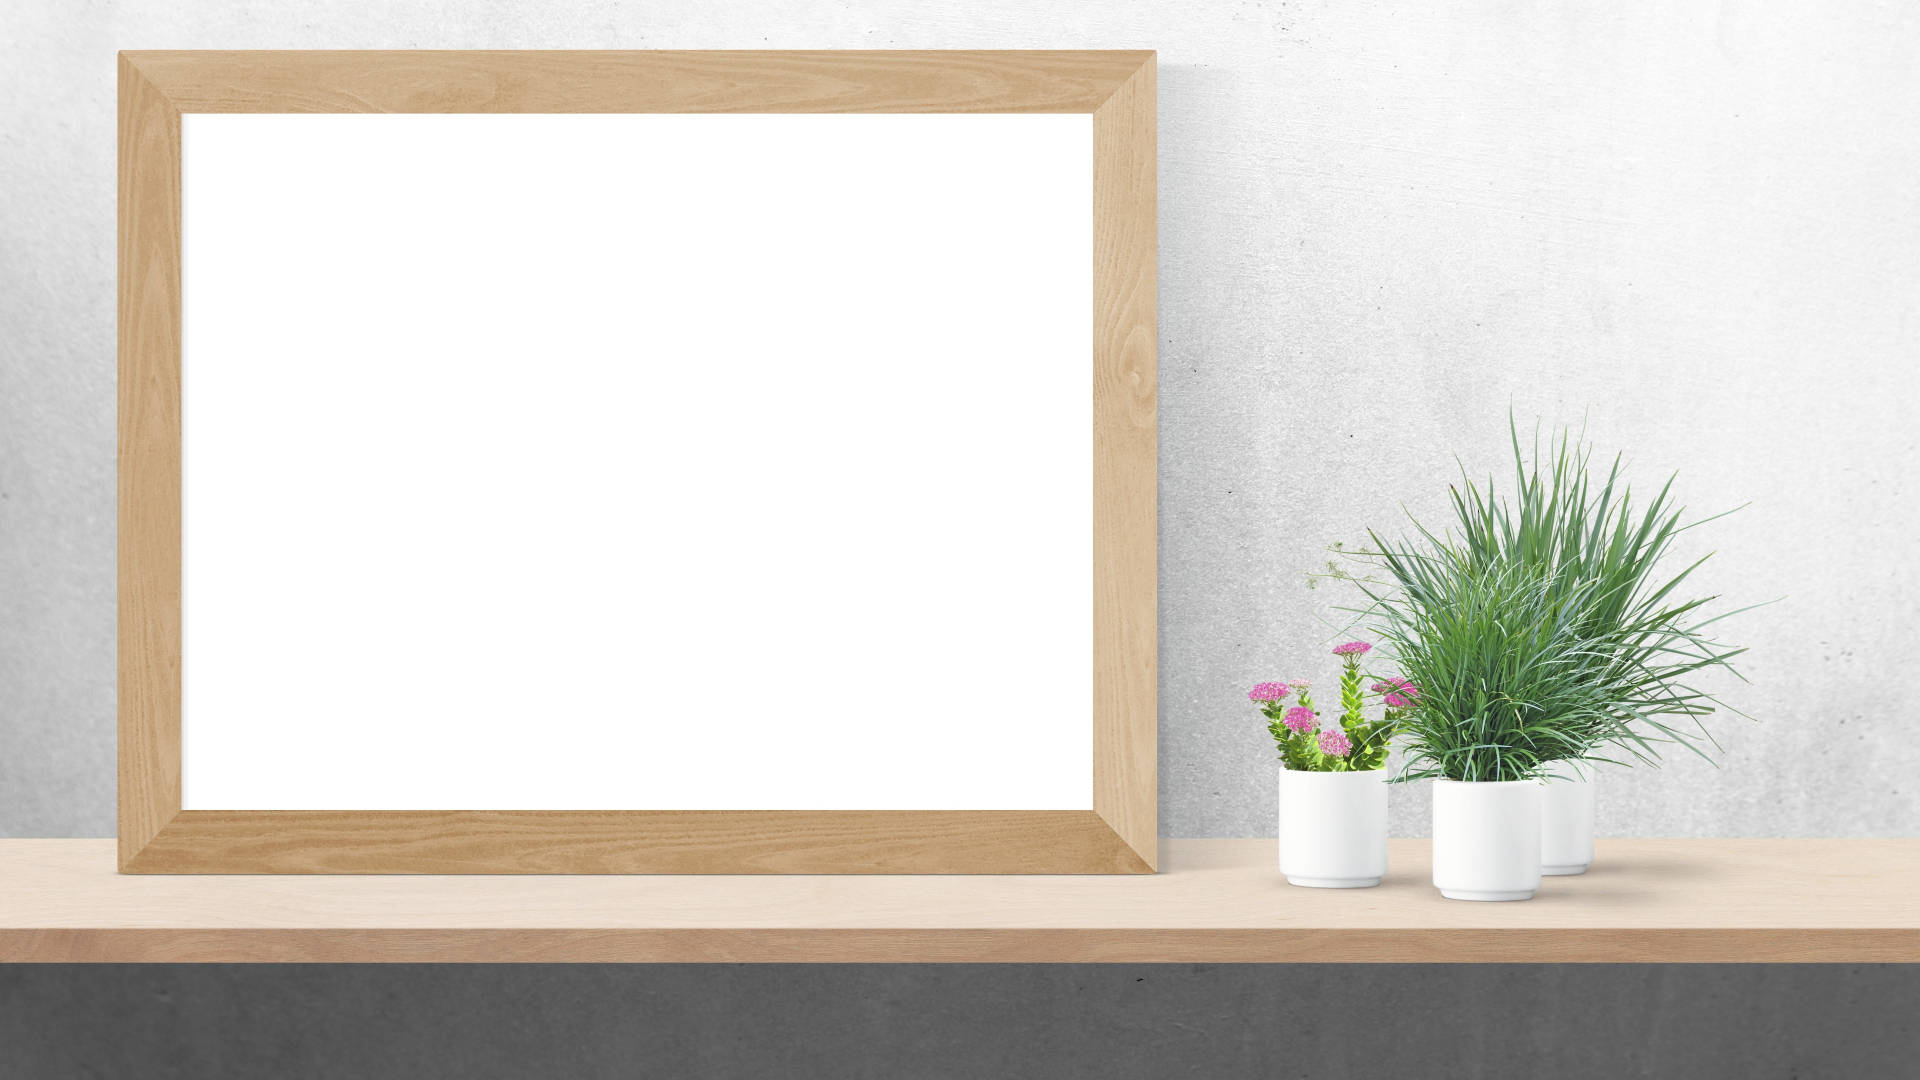 Elegant Brown Wooden Frame with Blank Space for an Artistic Mockup Poster Wallpaper